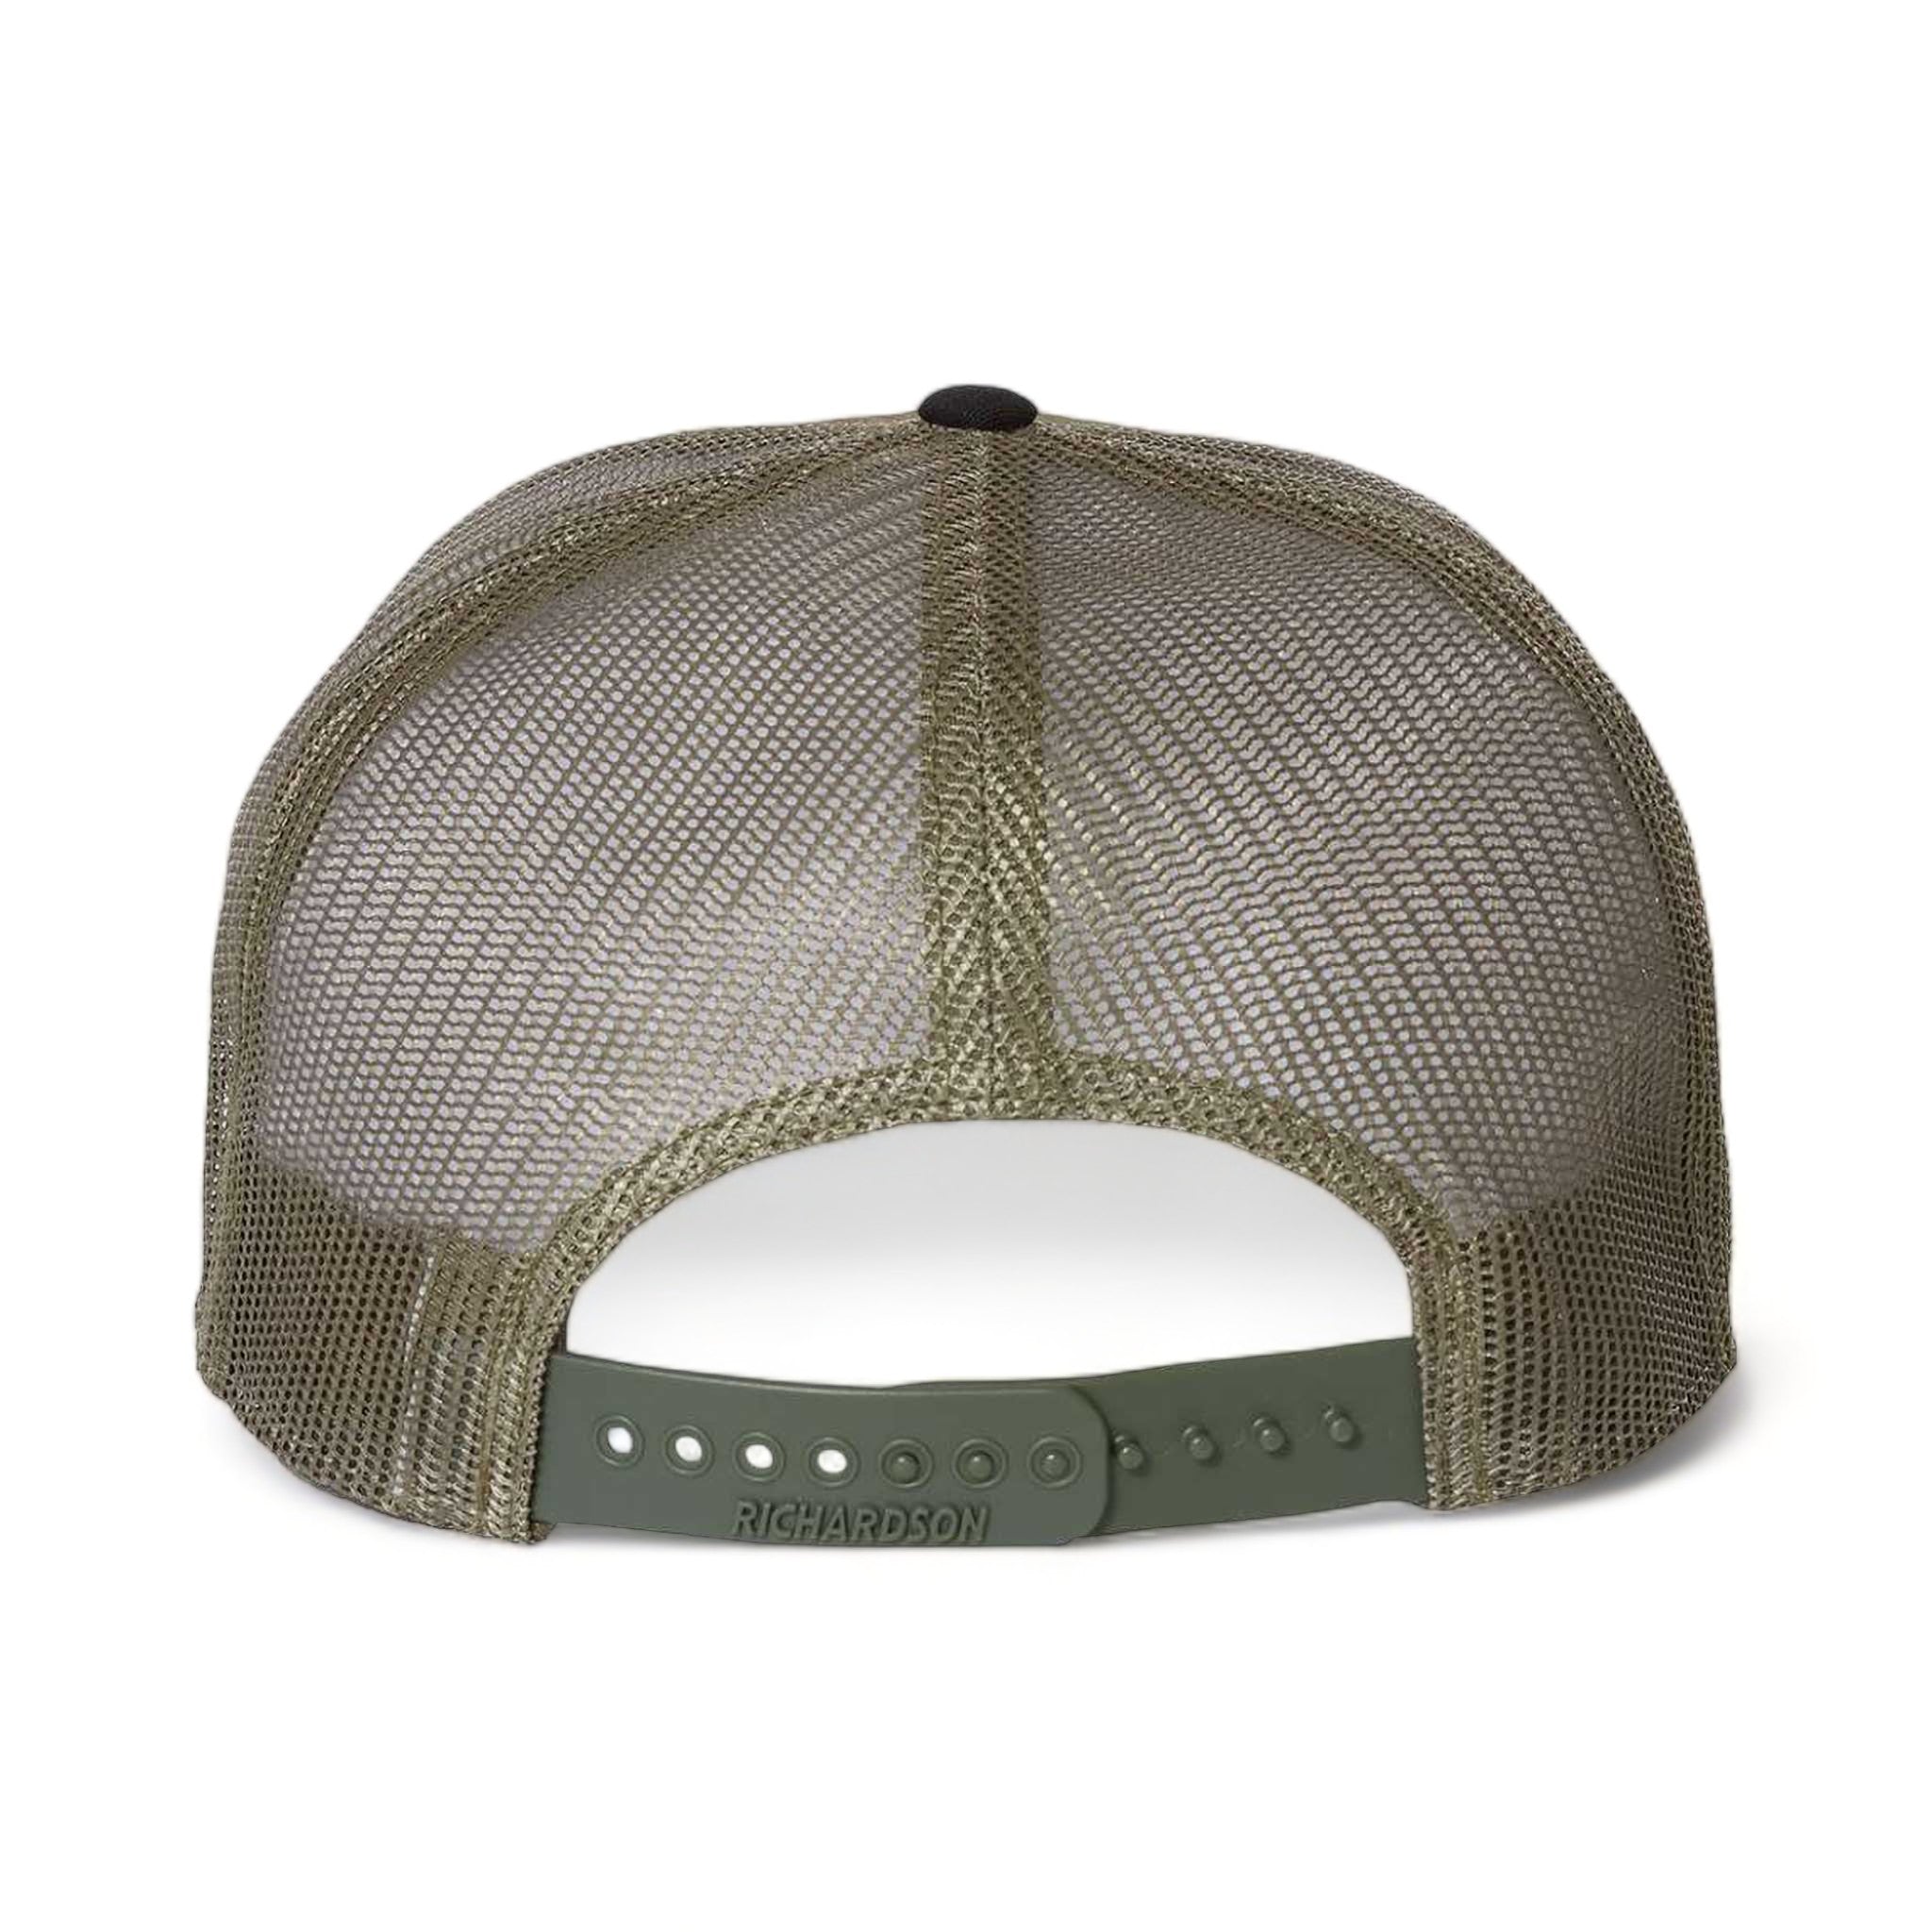 Back view of Richardson 168 custom hat in black, camo and loden